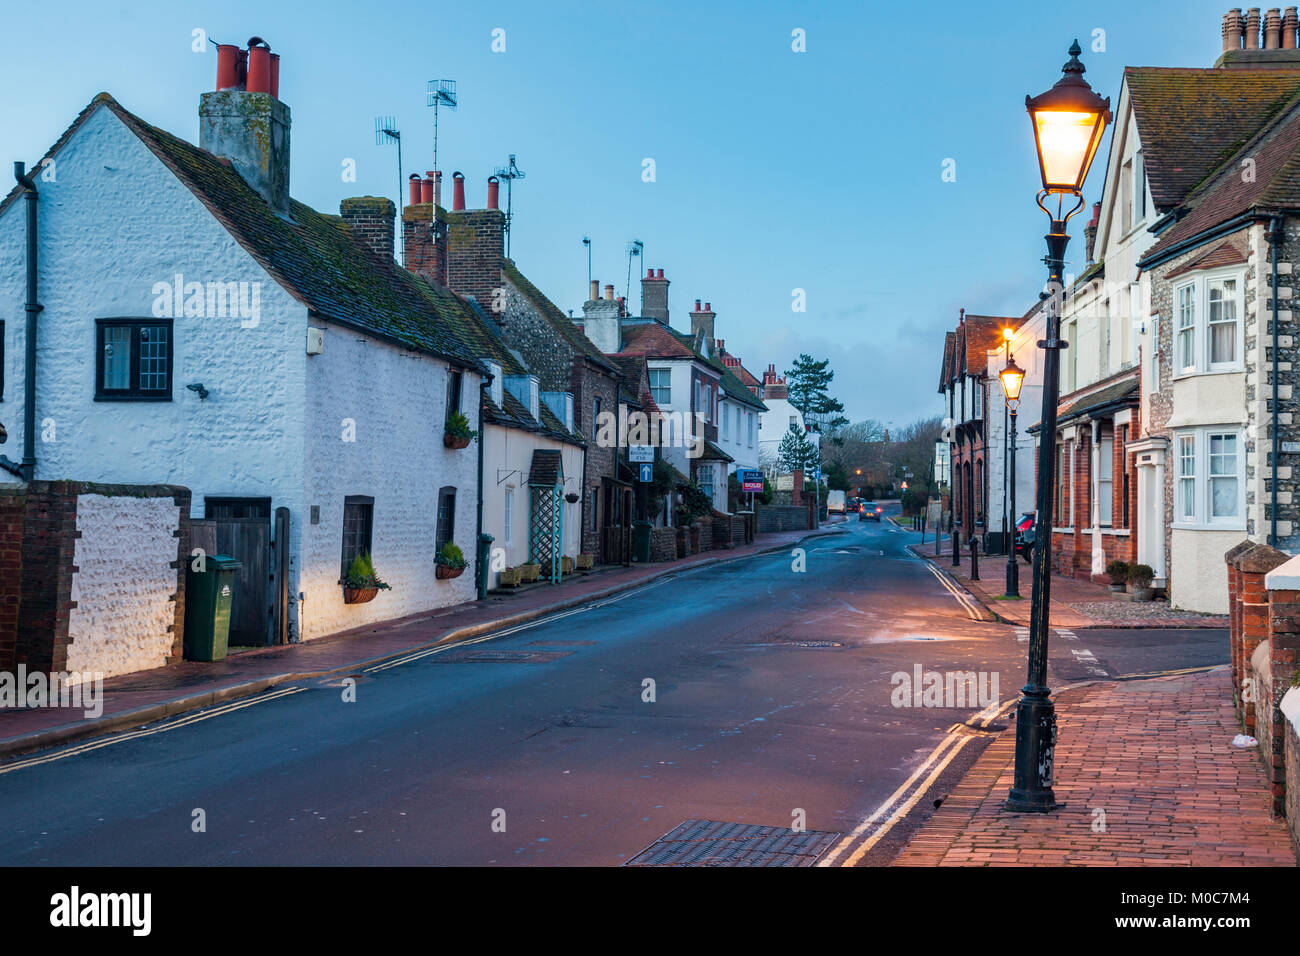 Evening in Rottingdean village, East Sussex, England. Stock Photo